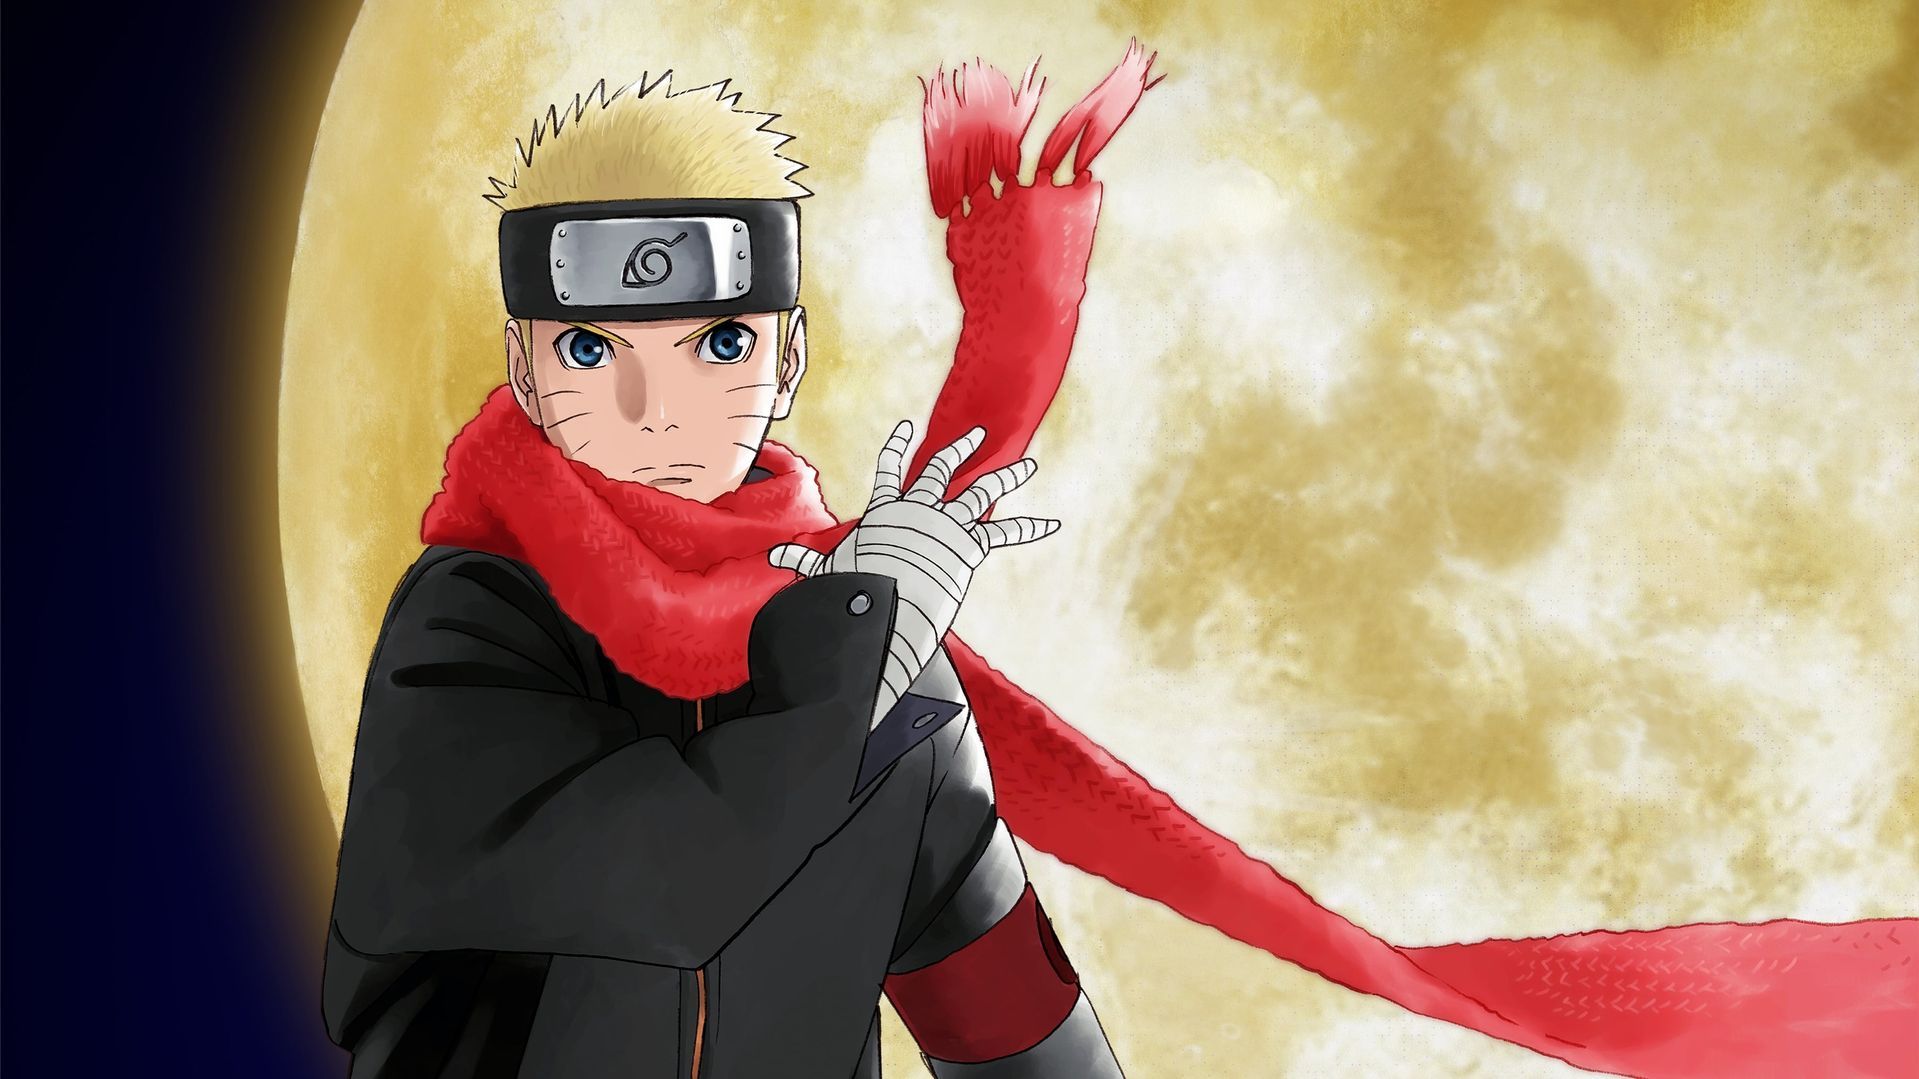 The Last: Naruto the Movie (2014): Where to Watch and Stream Online